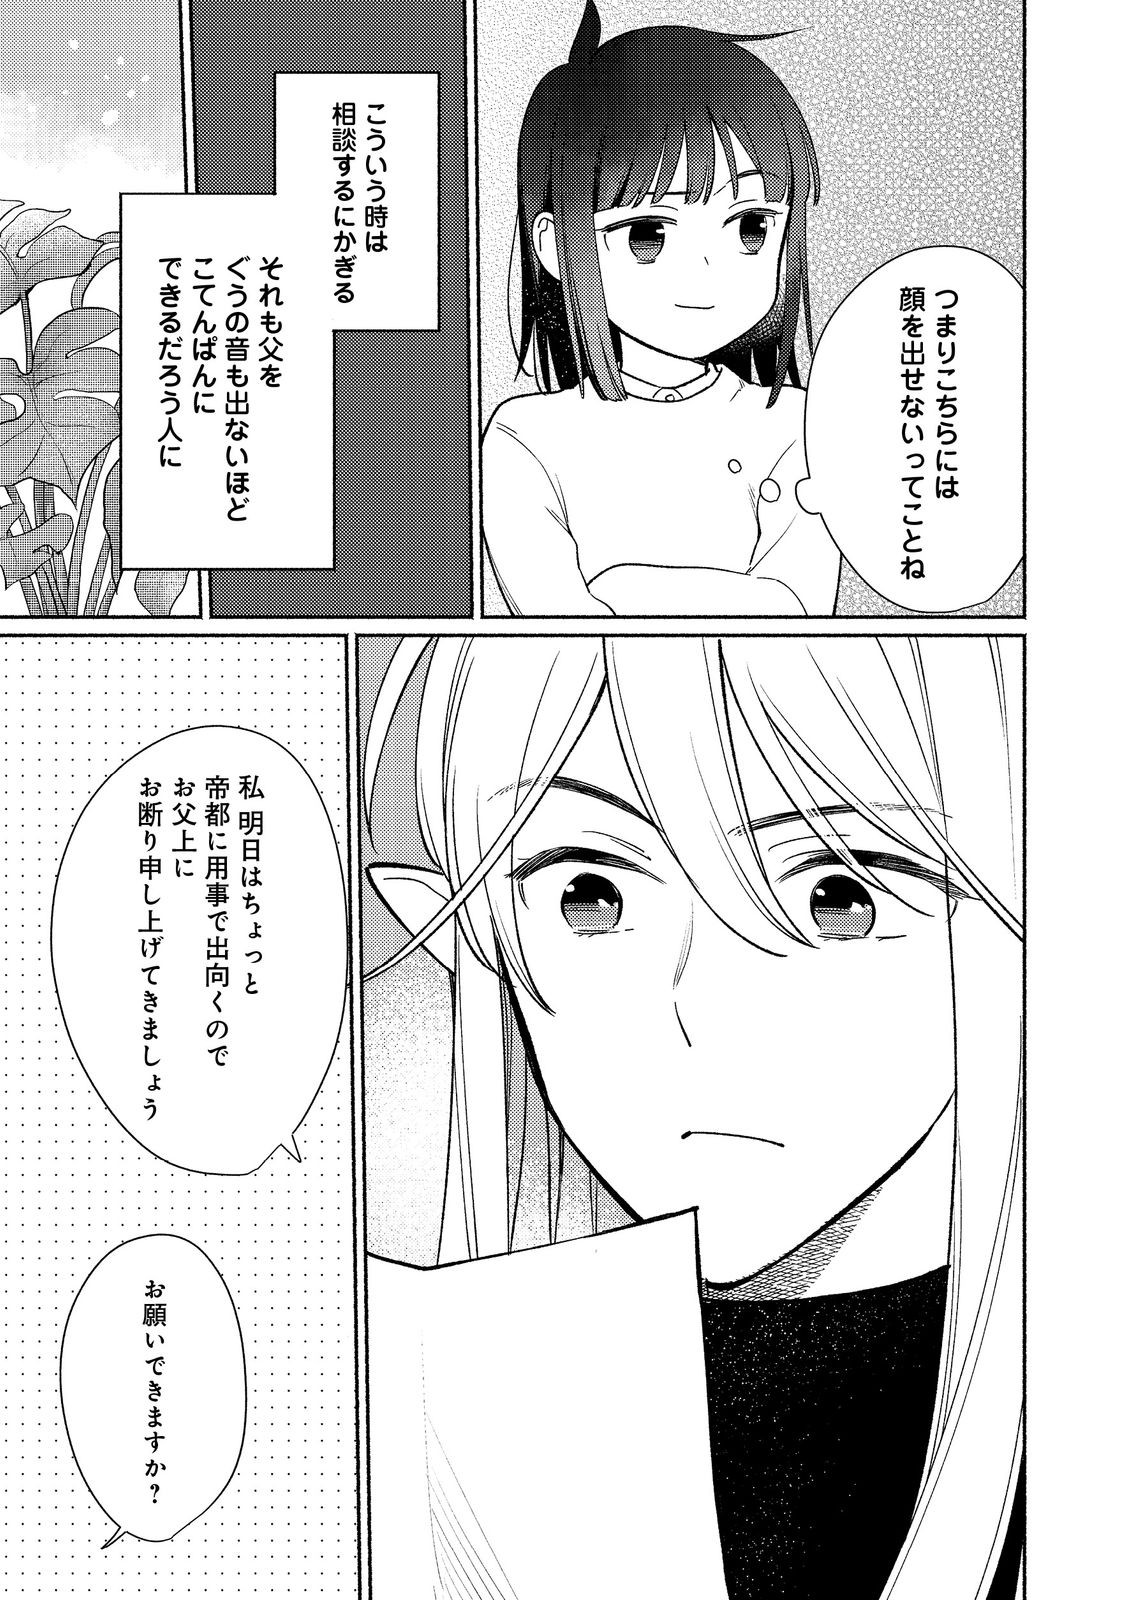 I’m the White Pig Nobleman 第24.2話 - Page 3